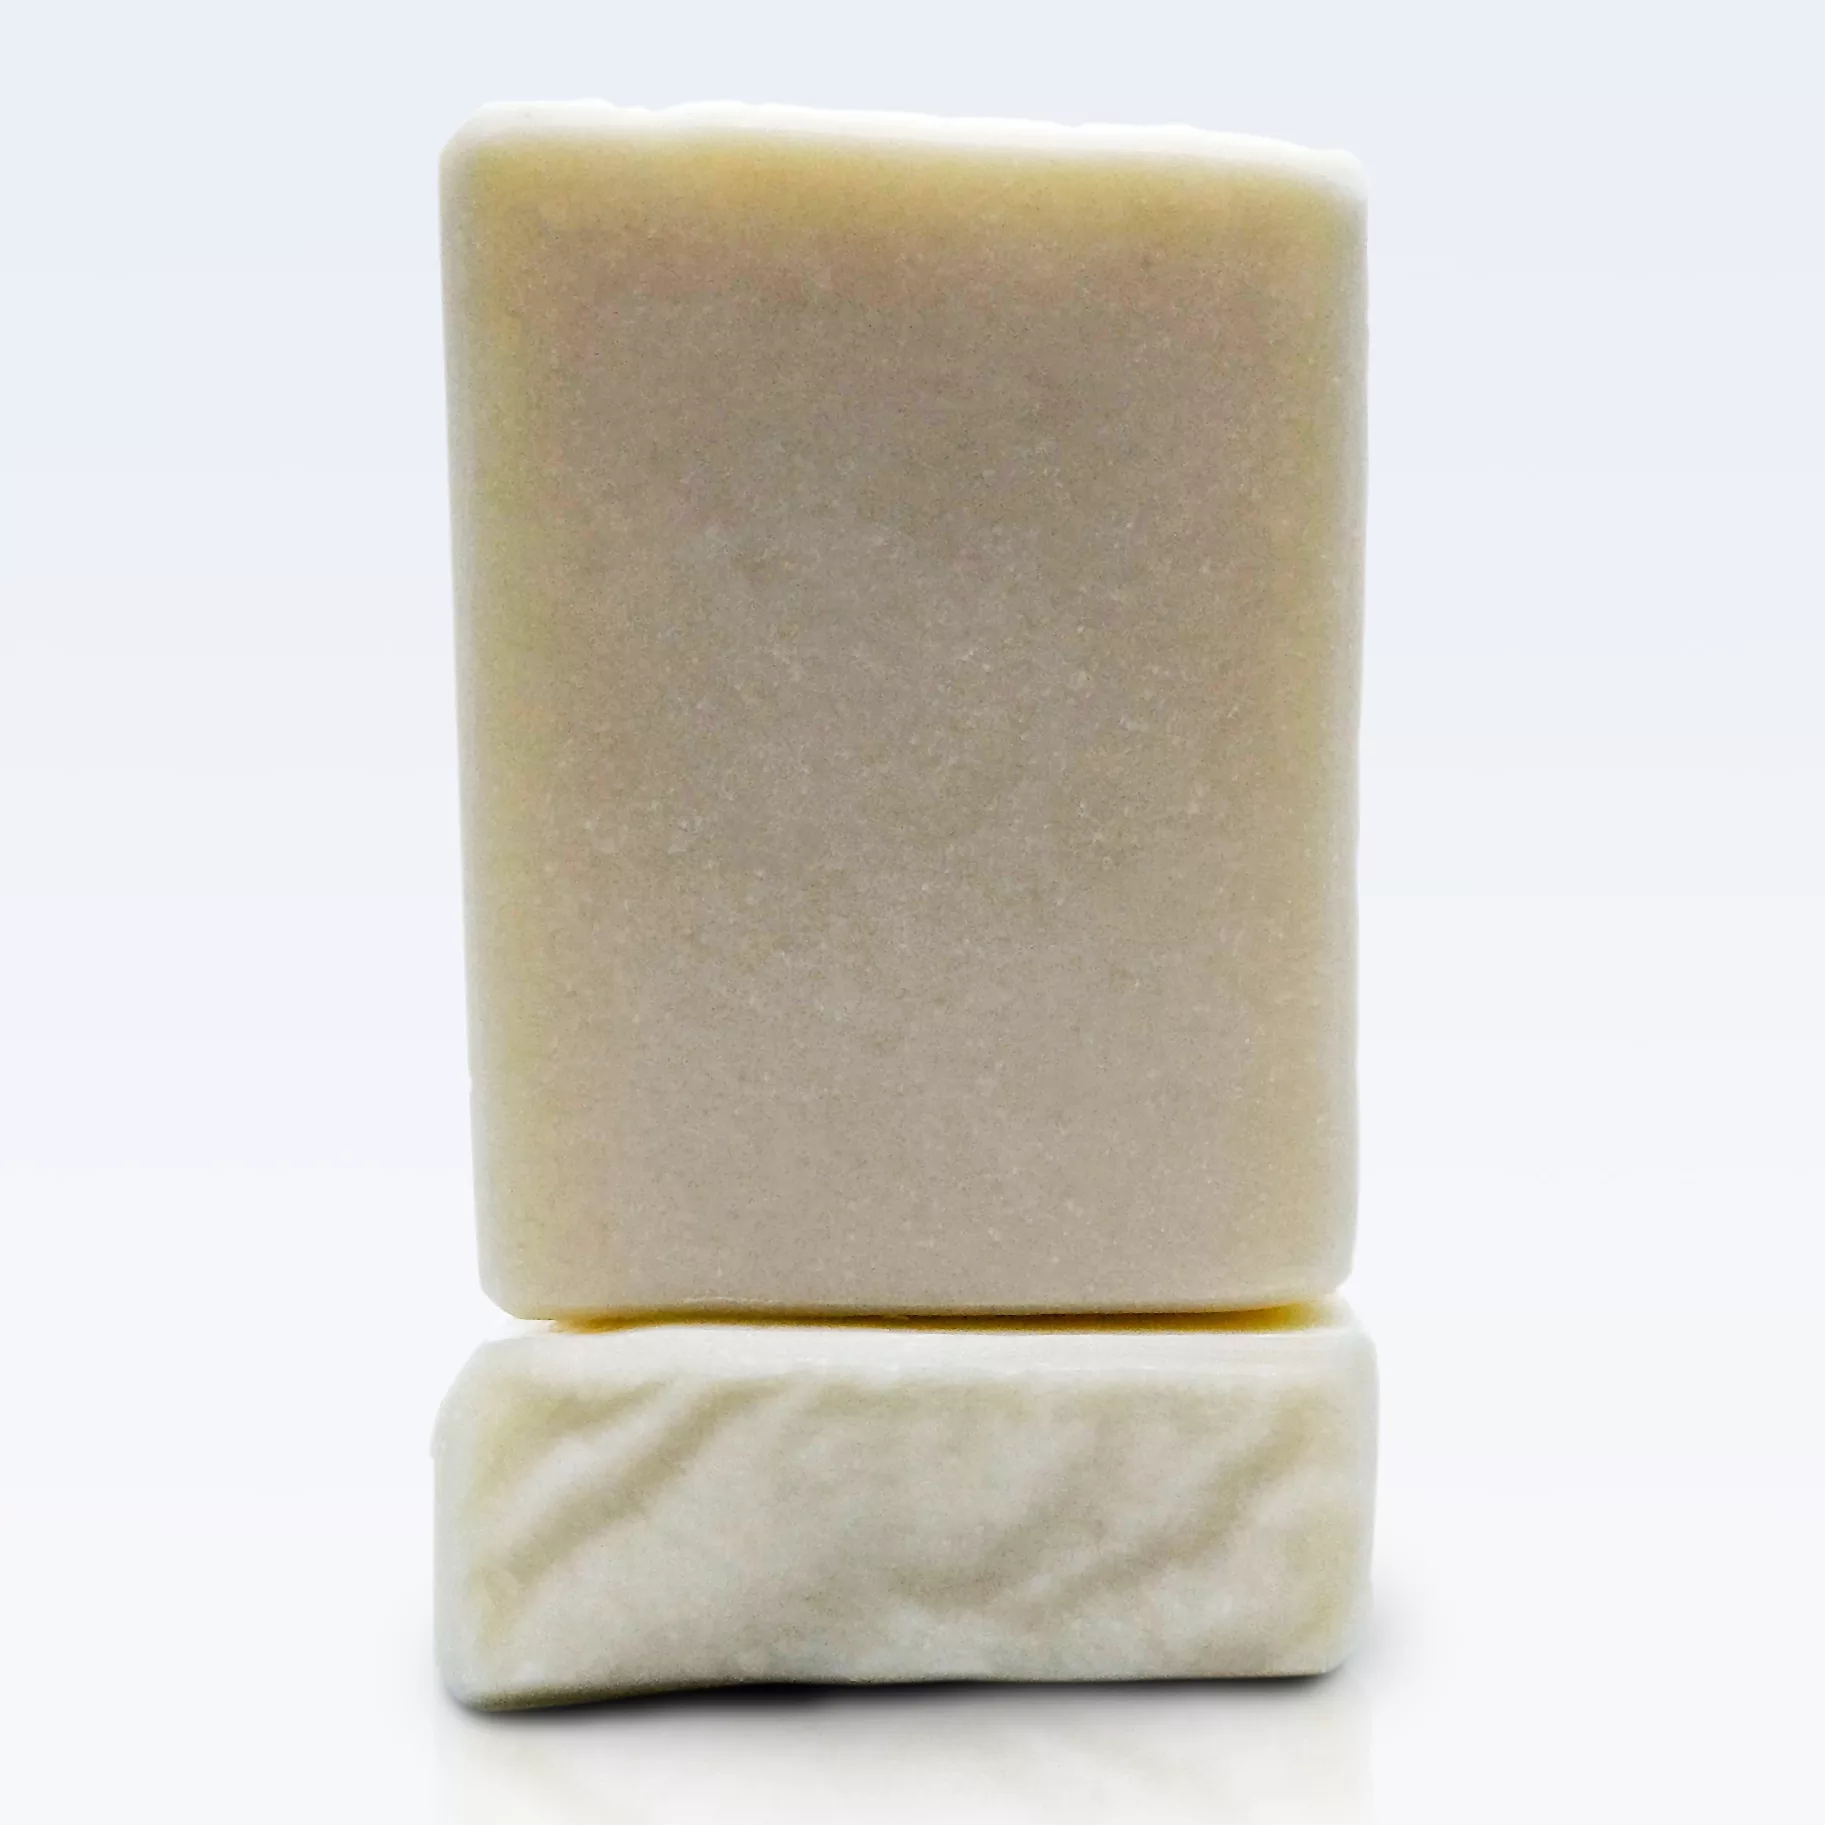 Naked handmade soap by Tubby Tabby Soaps (unscented, no added colour, natural gentle soap)